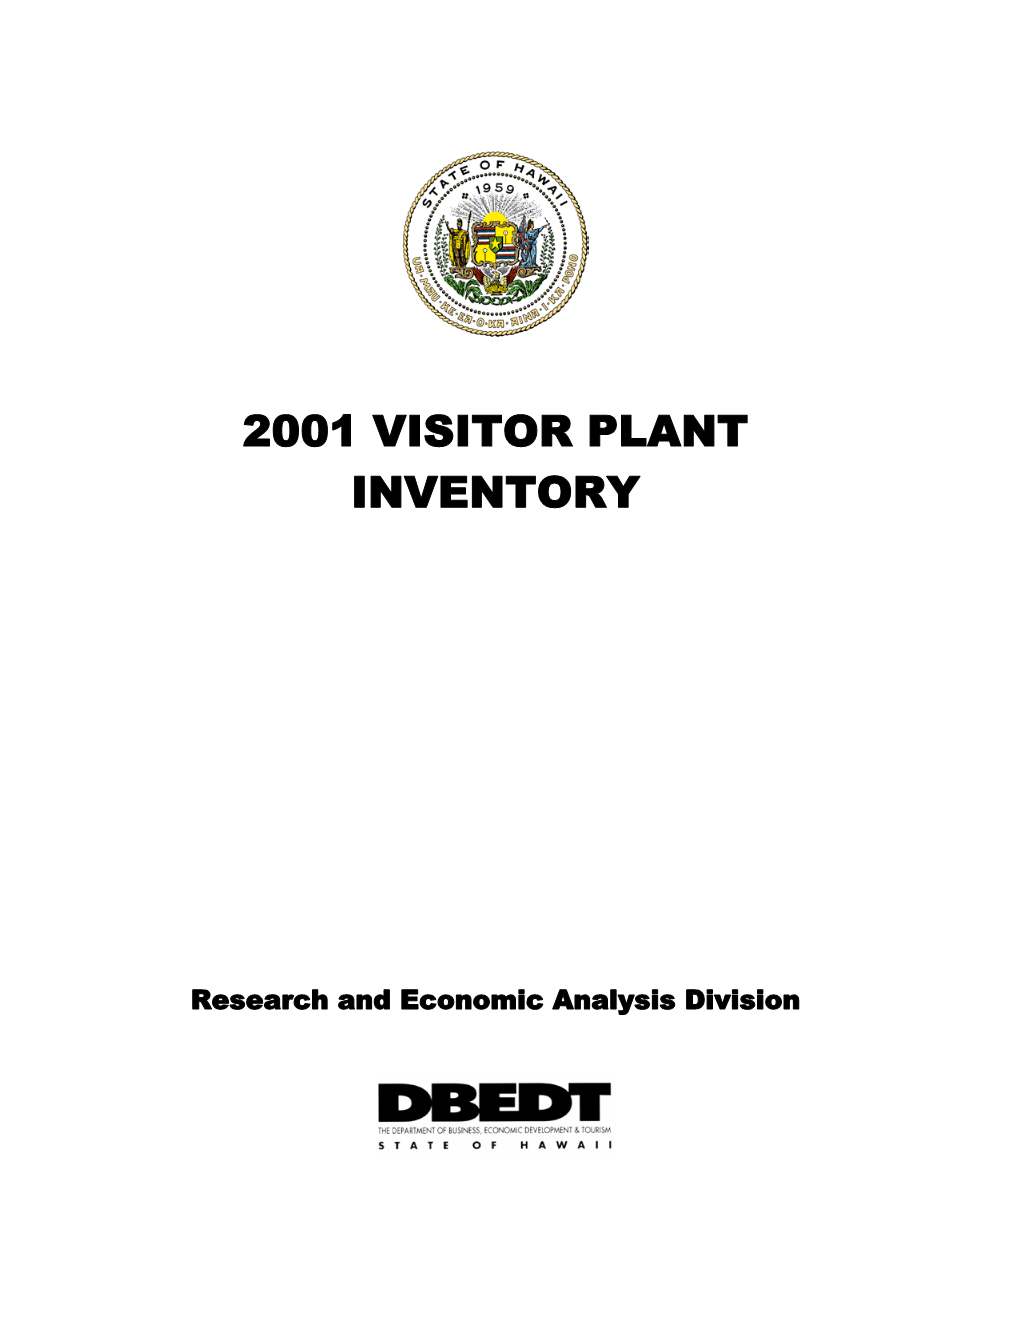 2001 Visitor Plant Inventory Report